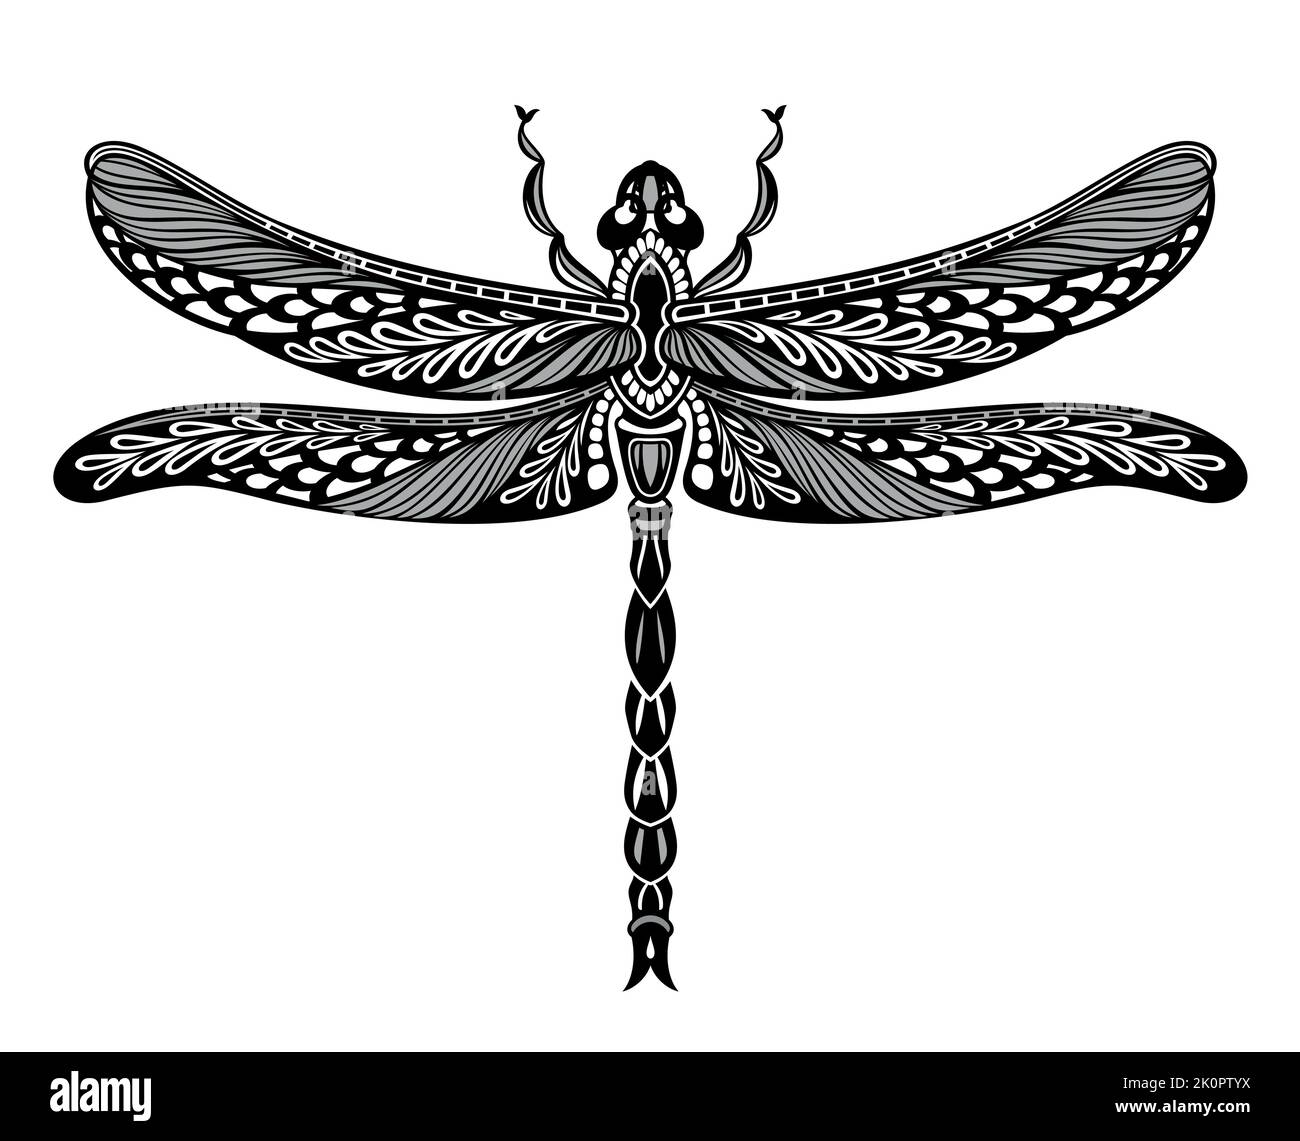 Decorative vector dragonfly on white background. Insect symbol Abstract de sign for mug,t shirt,phone case. Ideal for printing, posters, t-shirts, tex Stock Vector